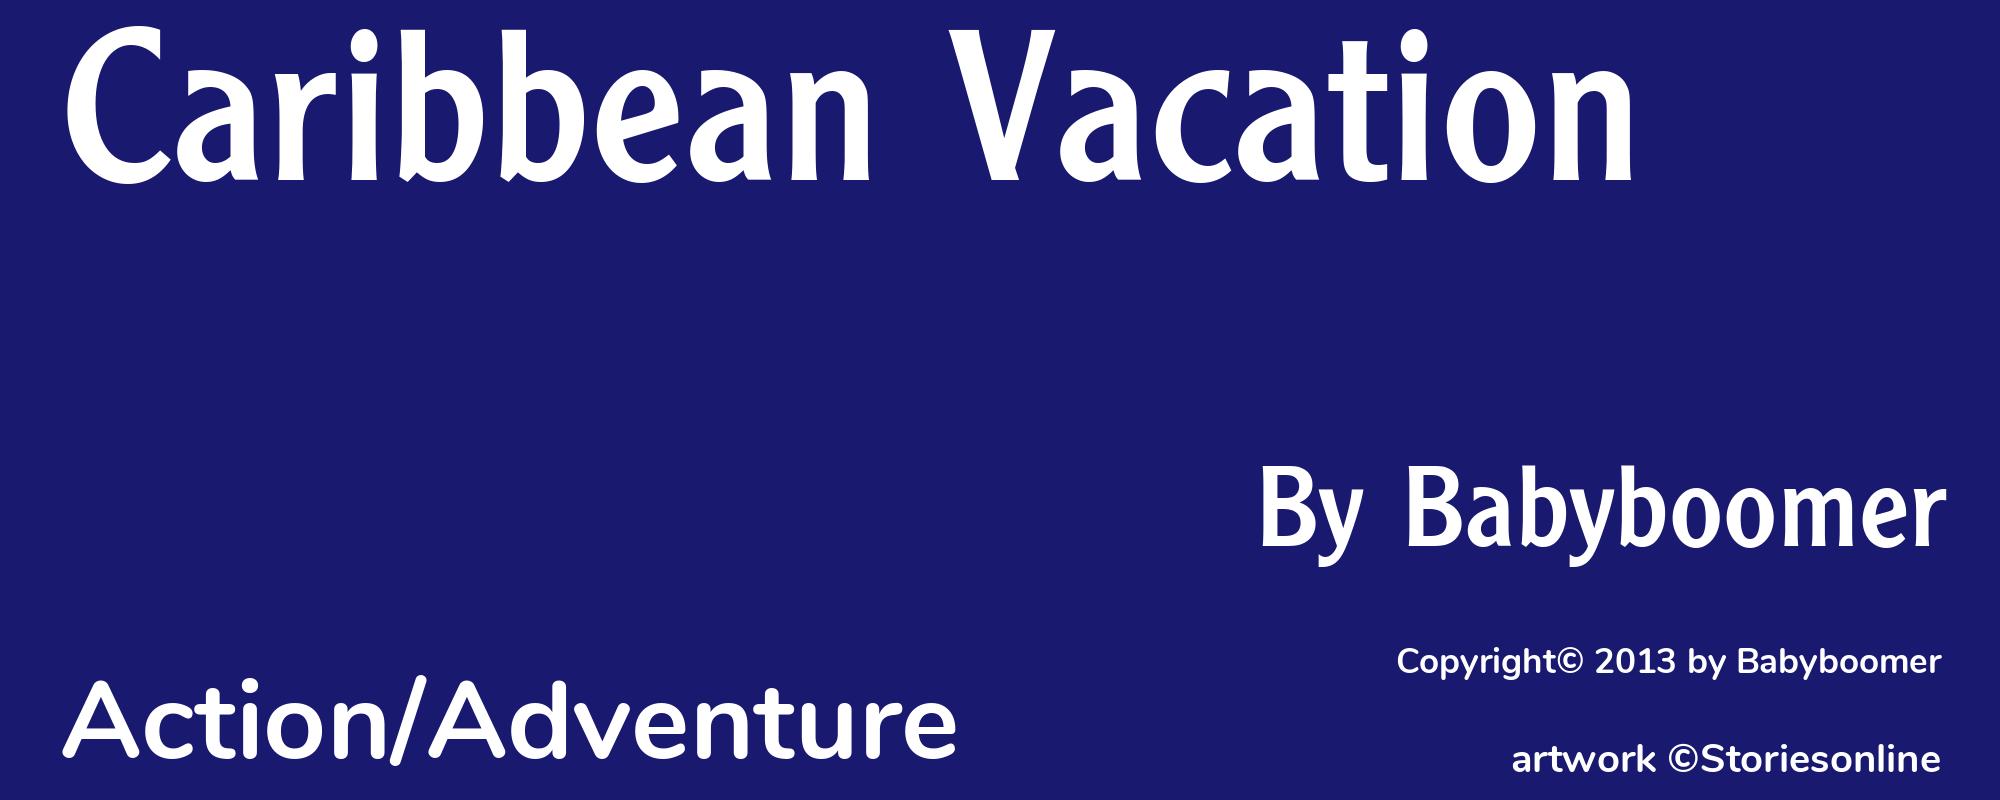 Caribbean Vacation - Cover